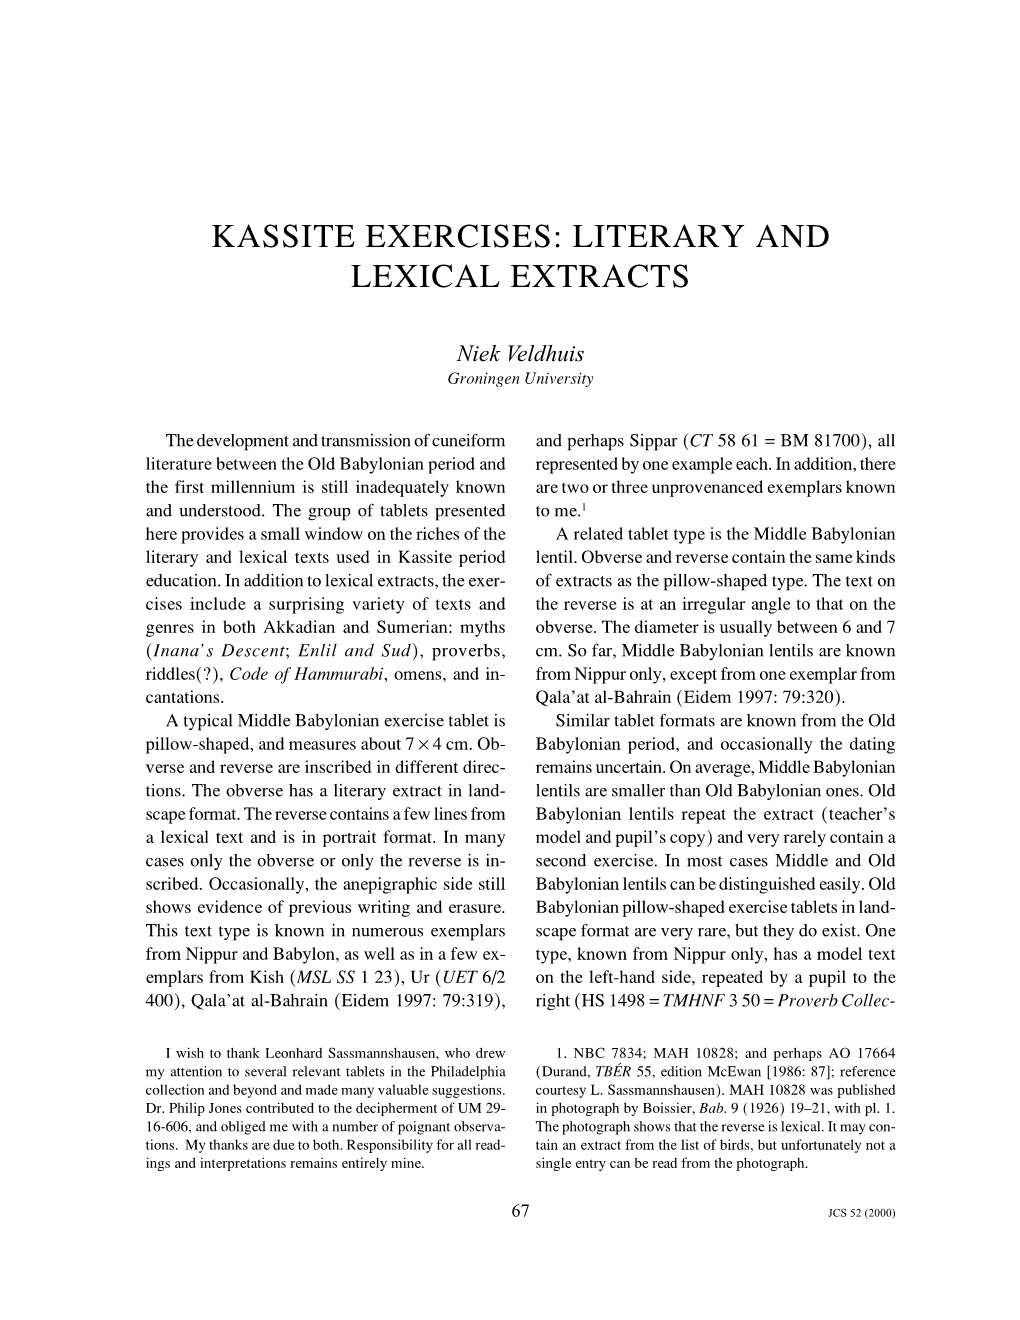 Kassite Exercises: Literary and Lexical Extracts